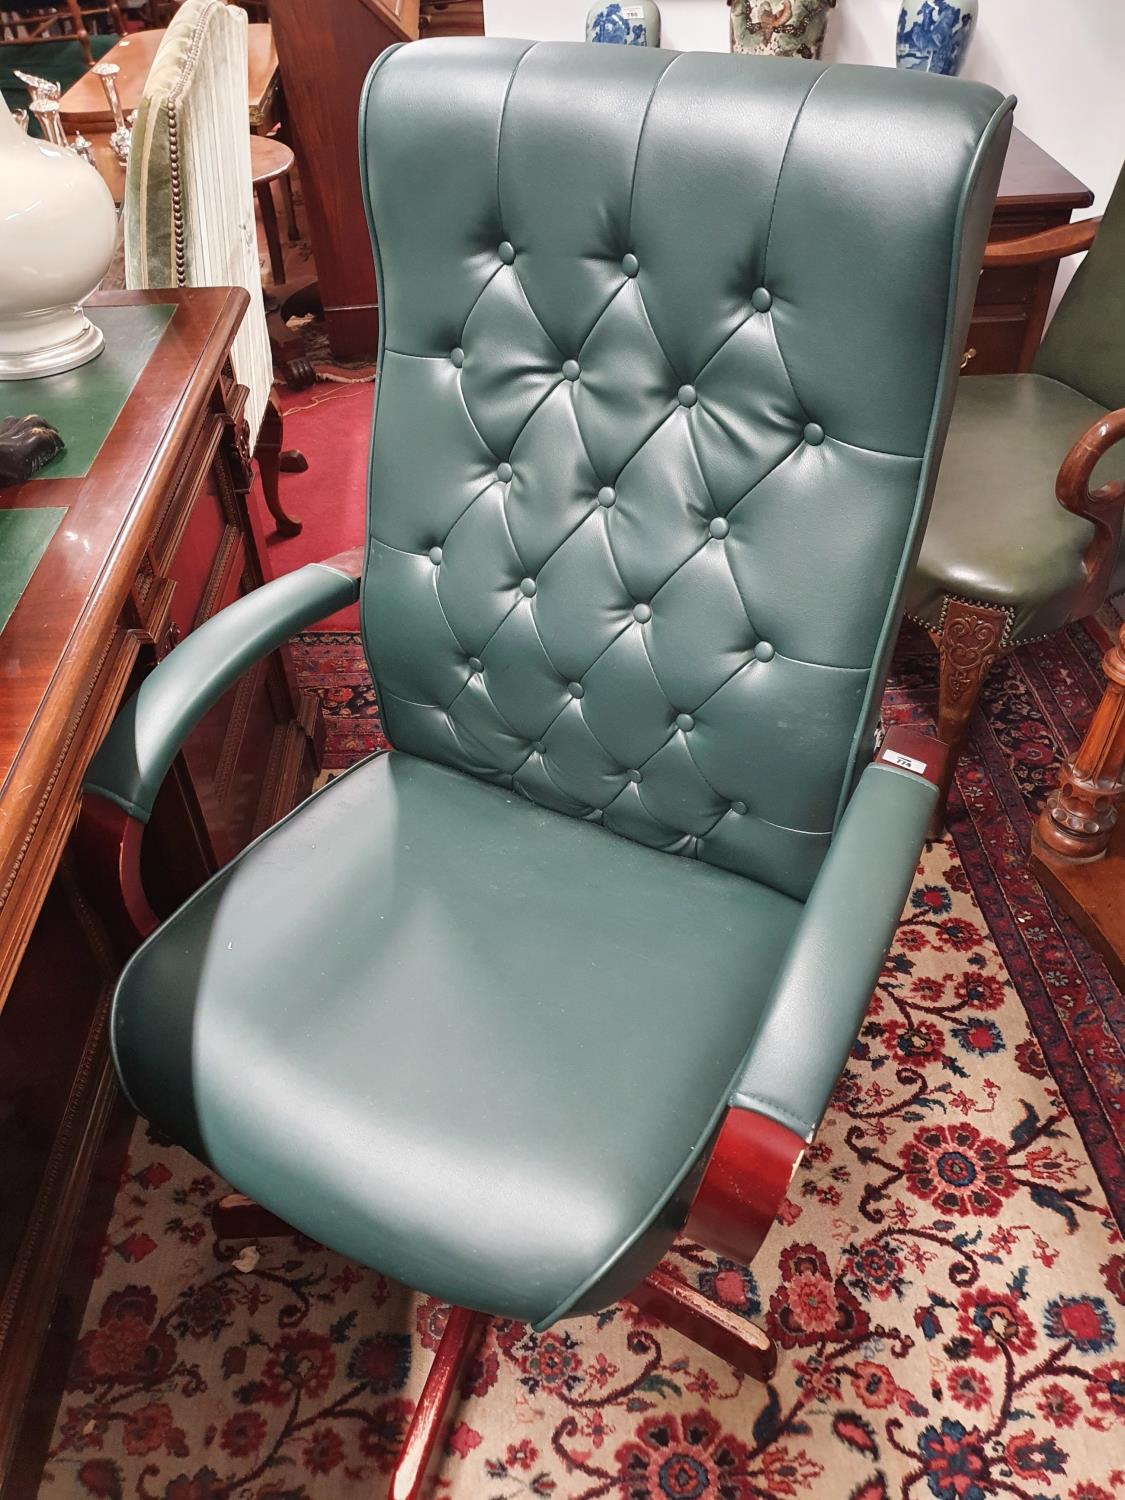 The property of The 5 star Hotel in London. A leather effect swivel Office Chair.